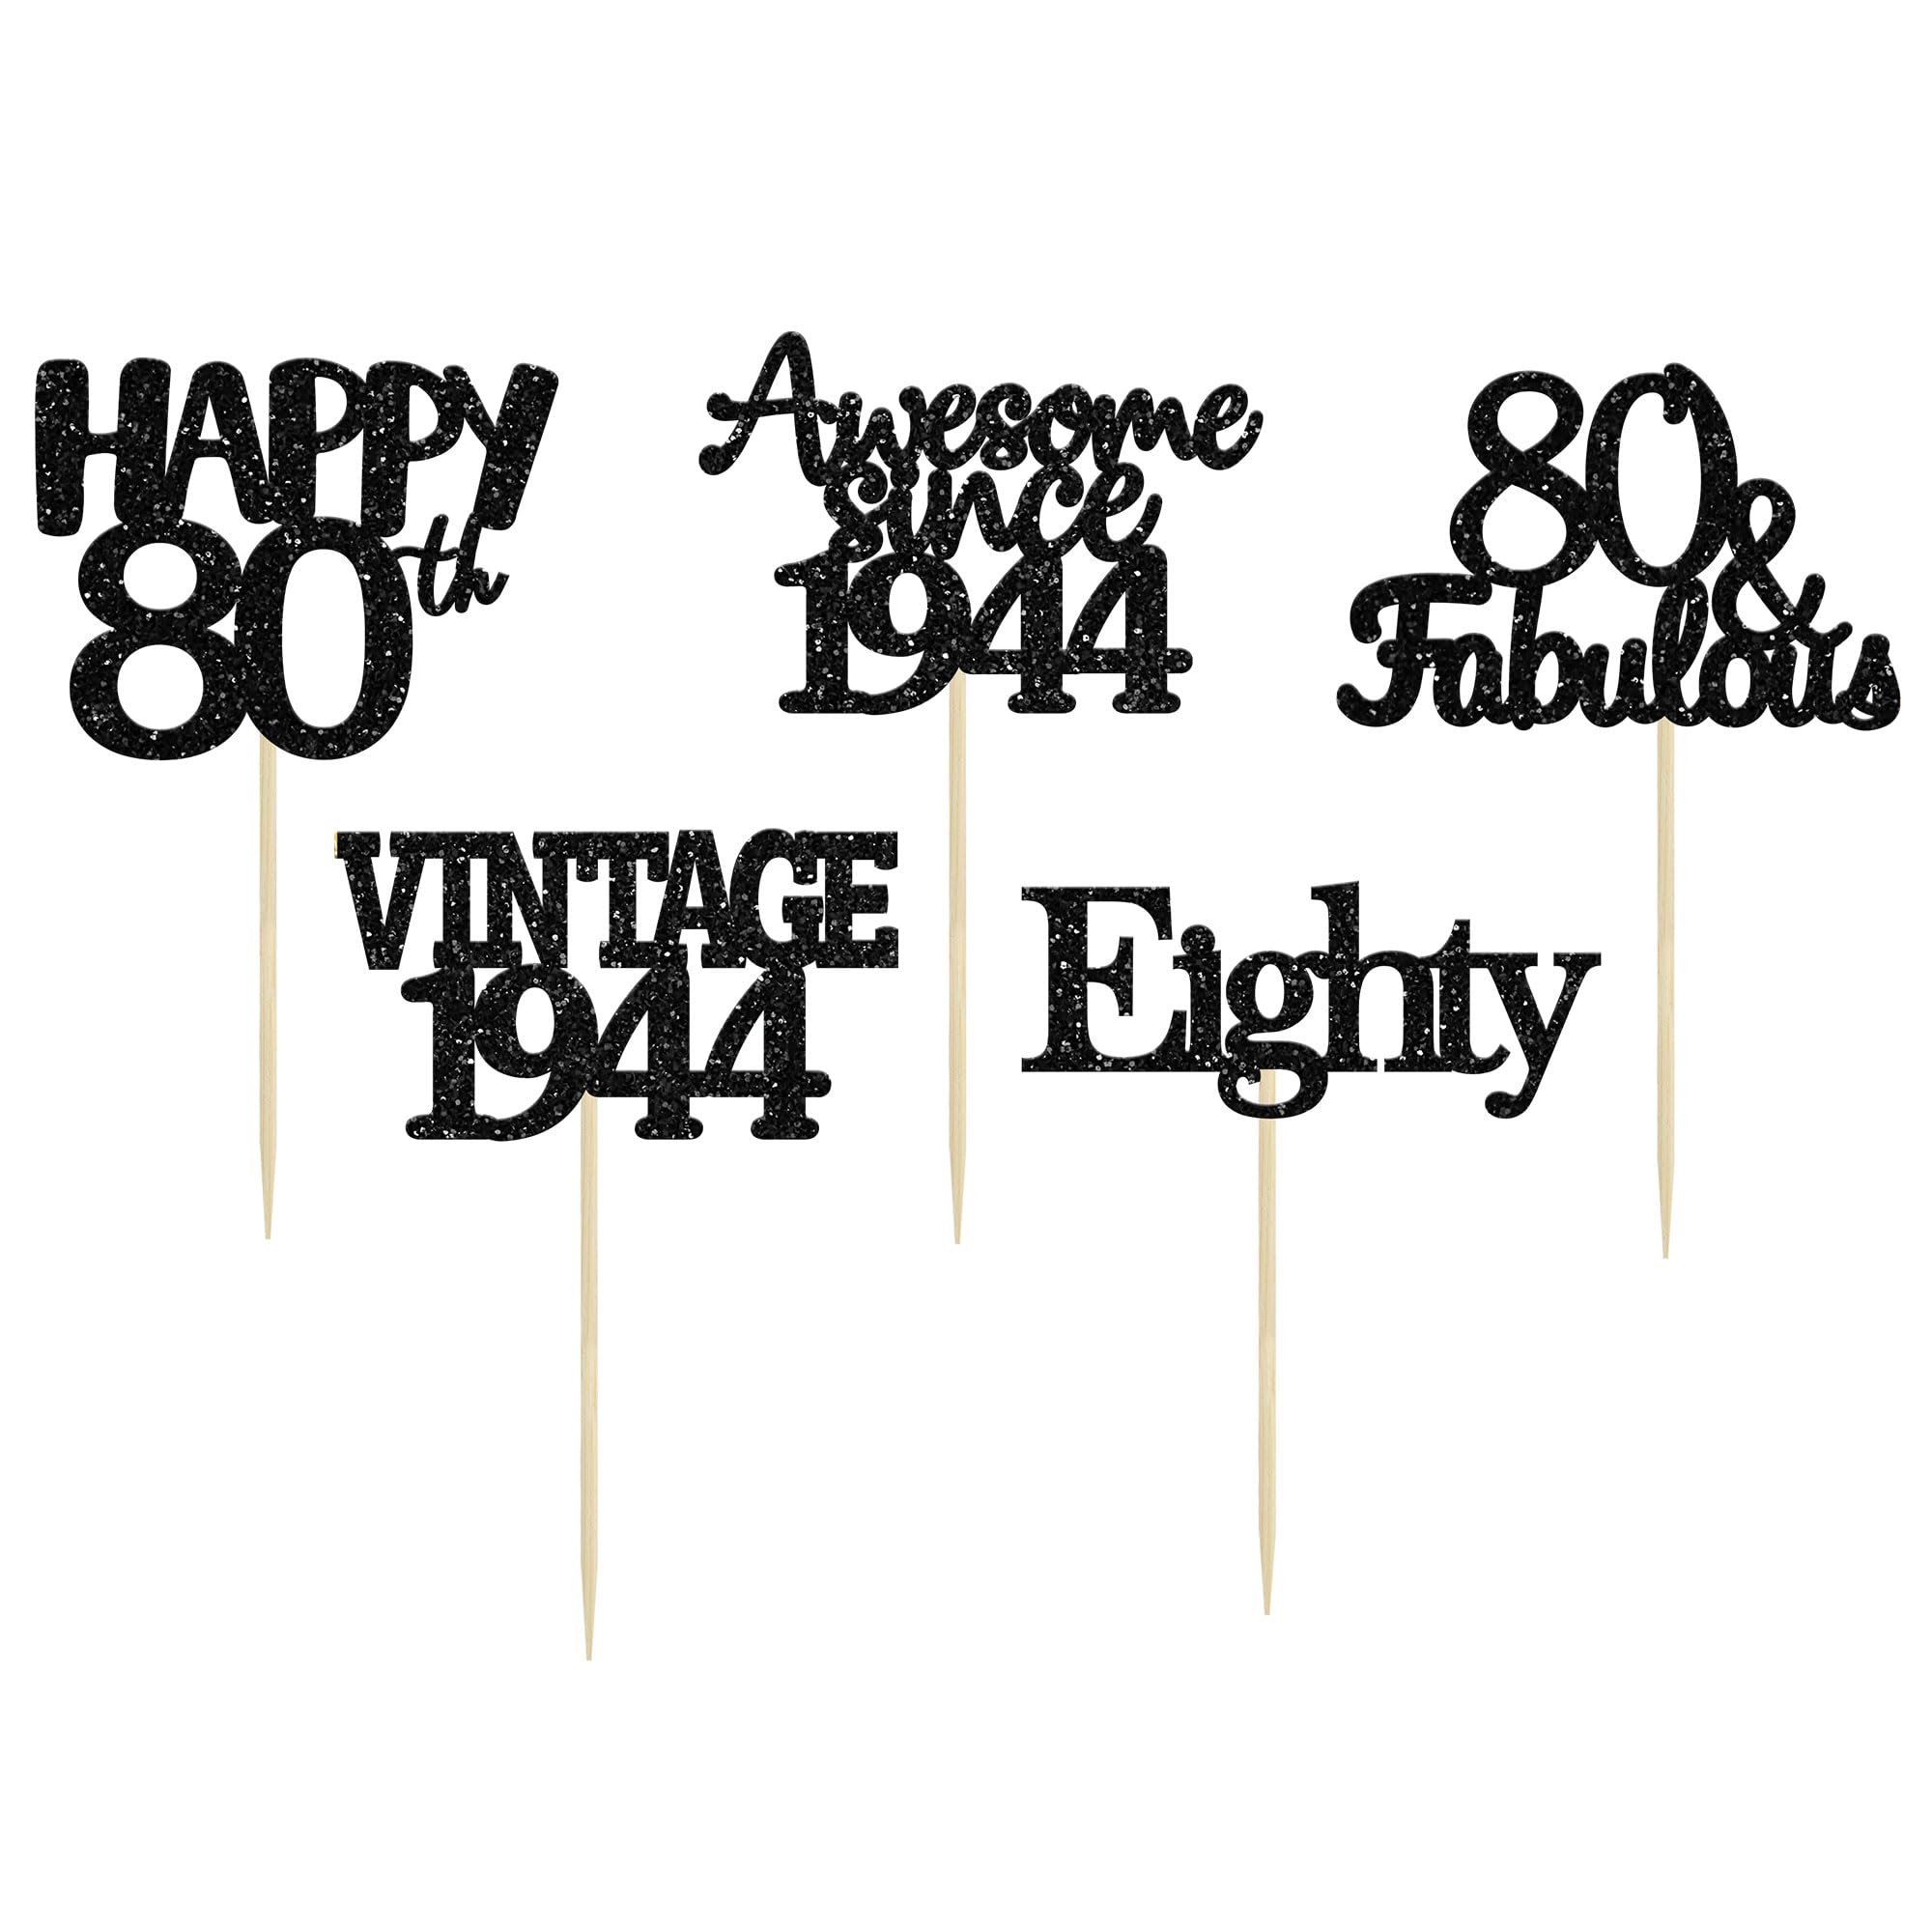 Gyufise 30 Pack Vintage 1944 Cupcake Toppers Glitter Cheers to 80 Fabulous Eighty Cupcake Picks 80th Birthday Wedding Anniversary Party Cake Decorations Supplies Black